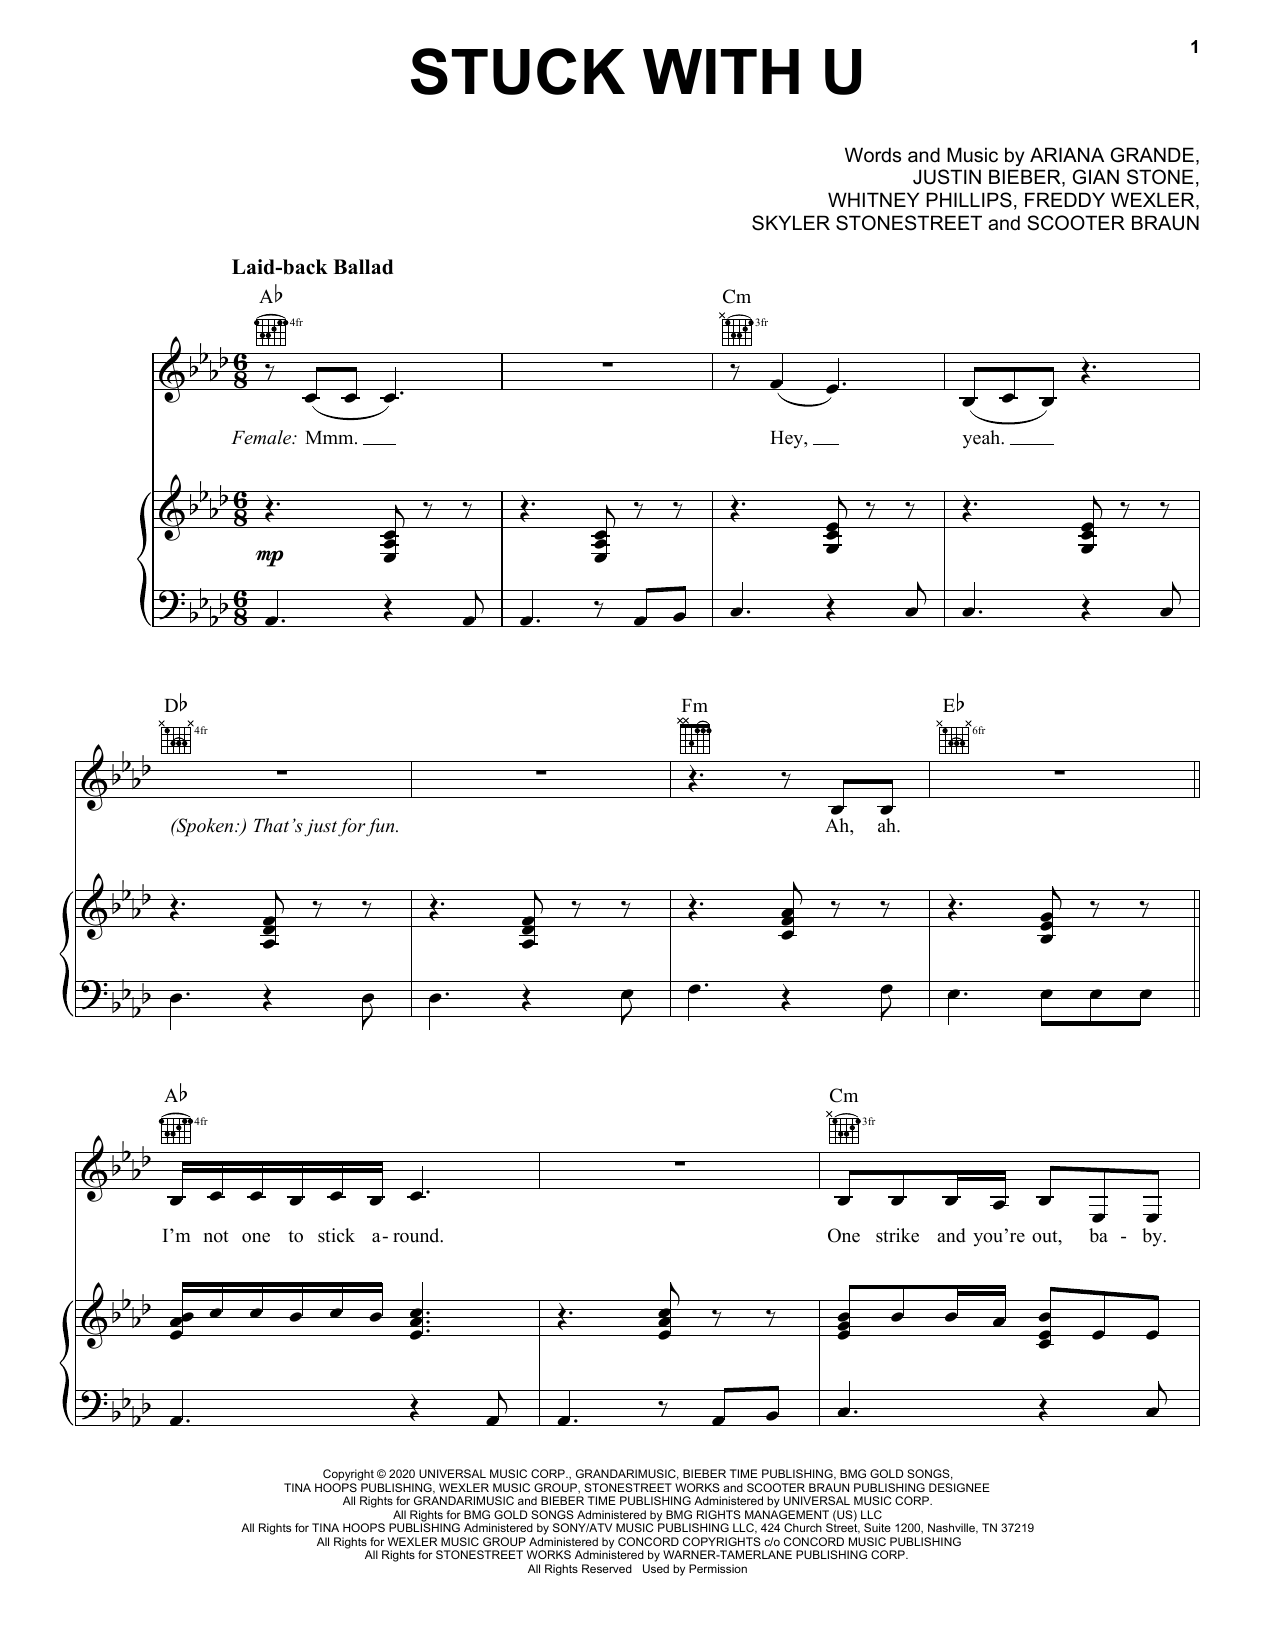 Ariana Grande and Justin Bieber Stuck with U sheet music notes and chords. Download Printable PDF.